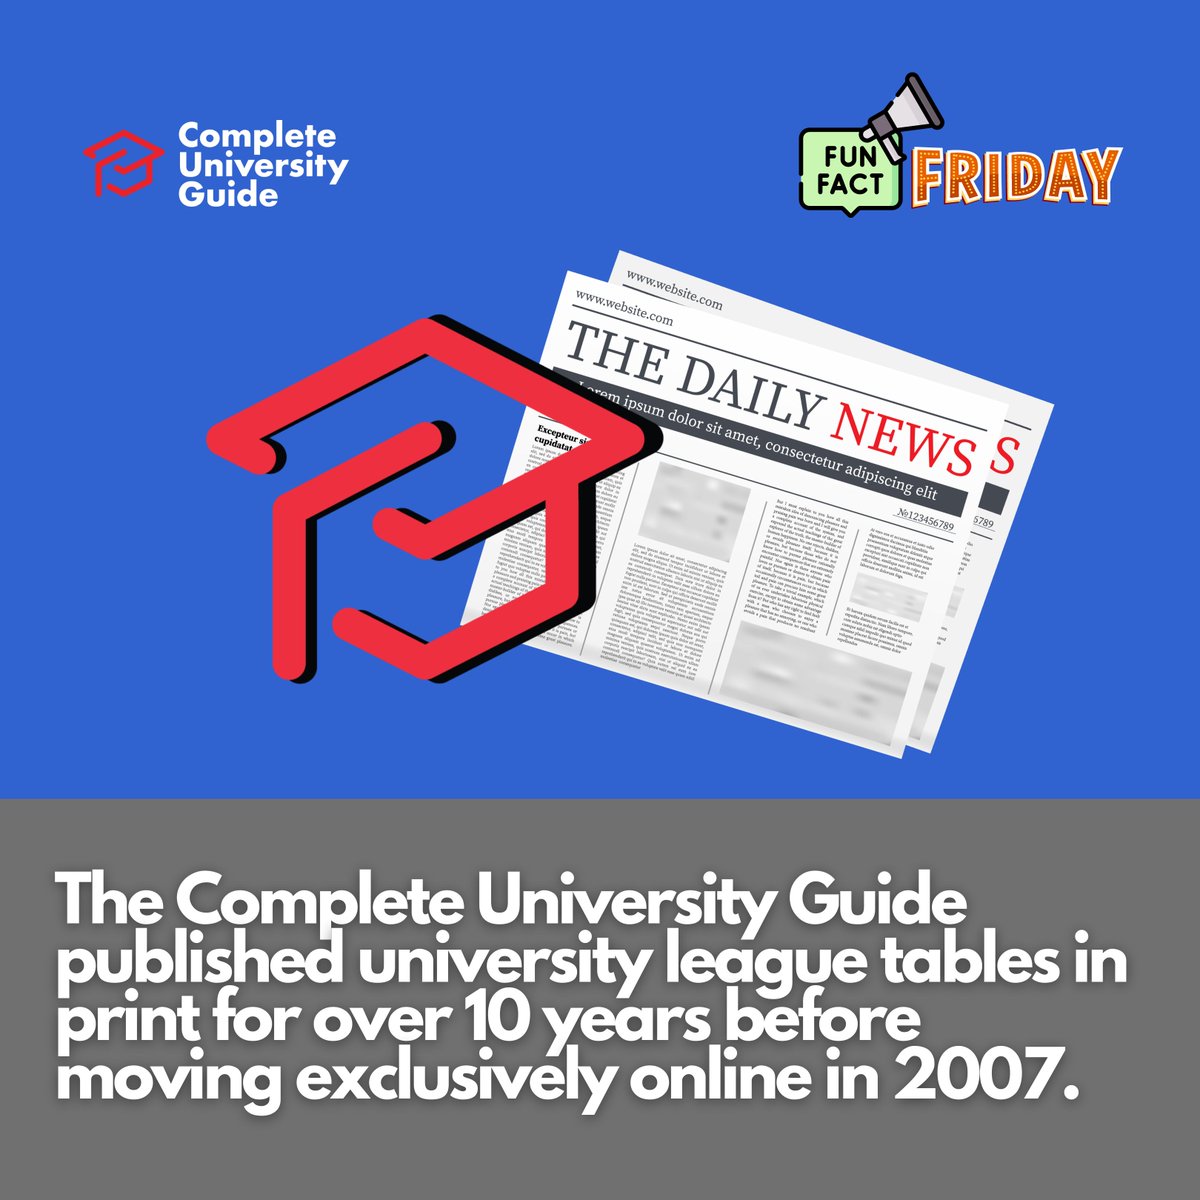 The Complete University Guide league tables started in print form in 1993 and moved exclusively online in 2007. Check out our new league tables on site 👉 bit.ly/3JQB9em #leaguetables2025 #rankings